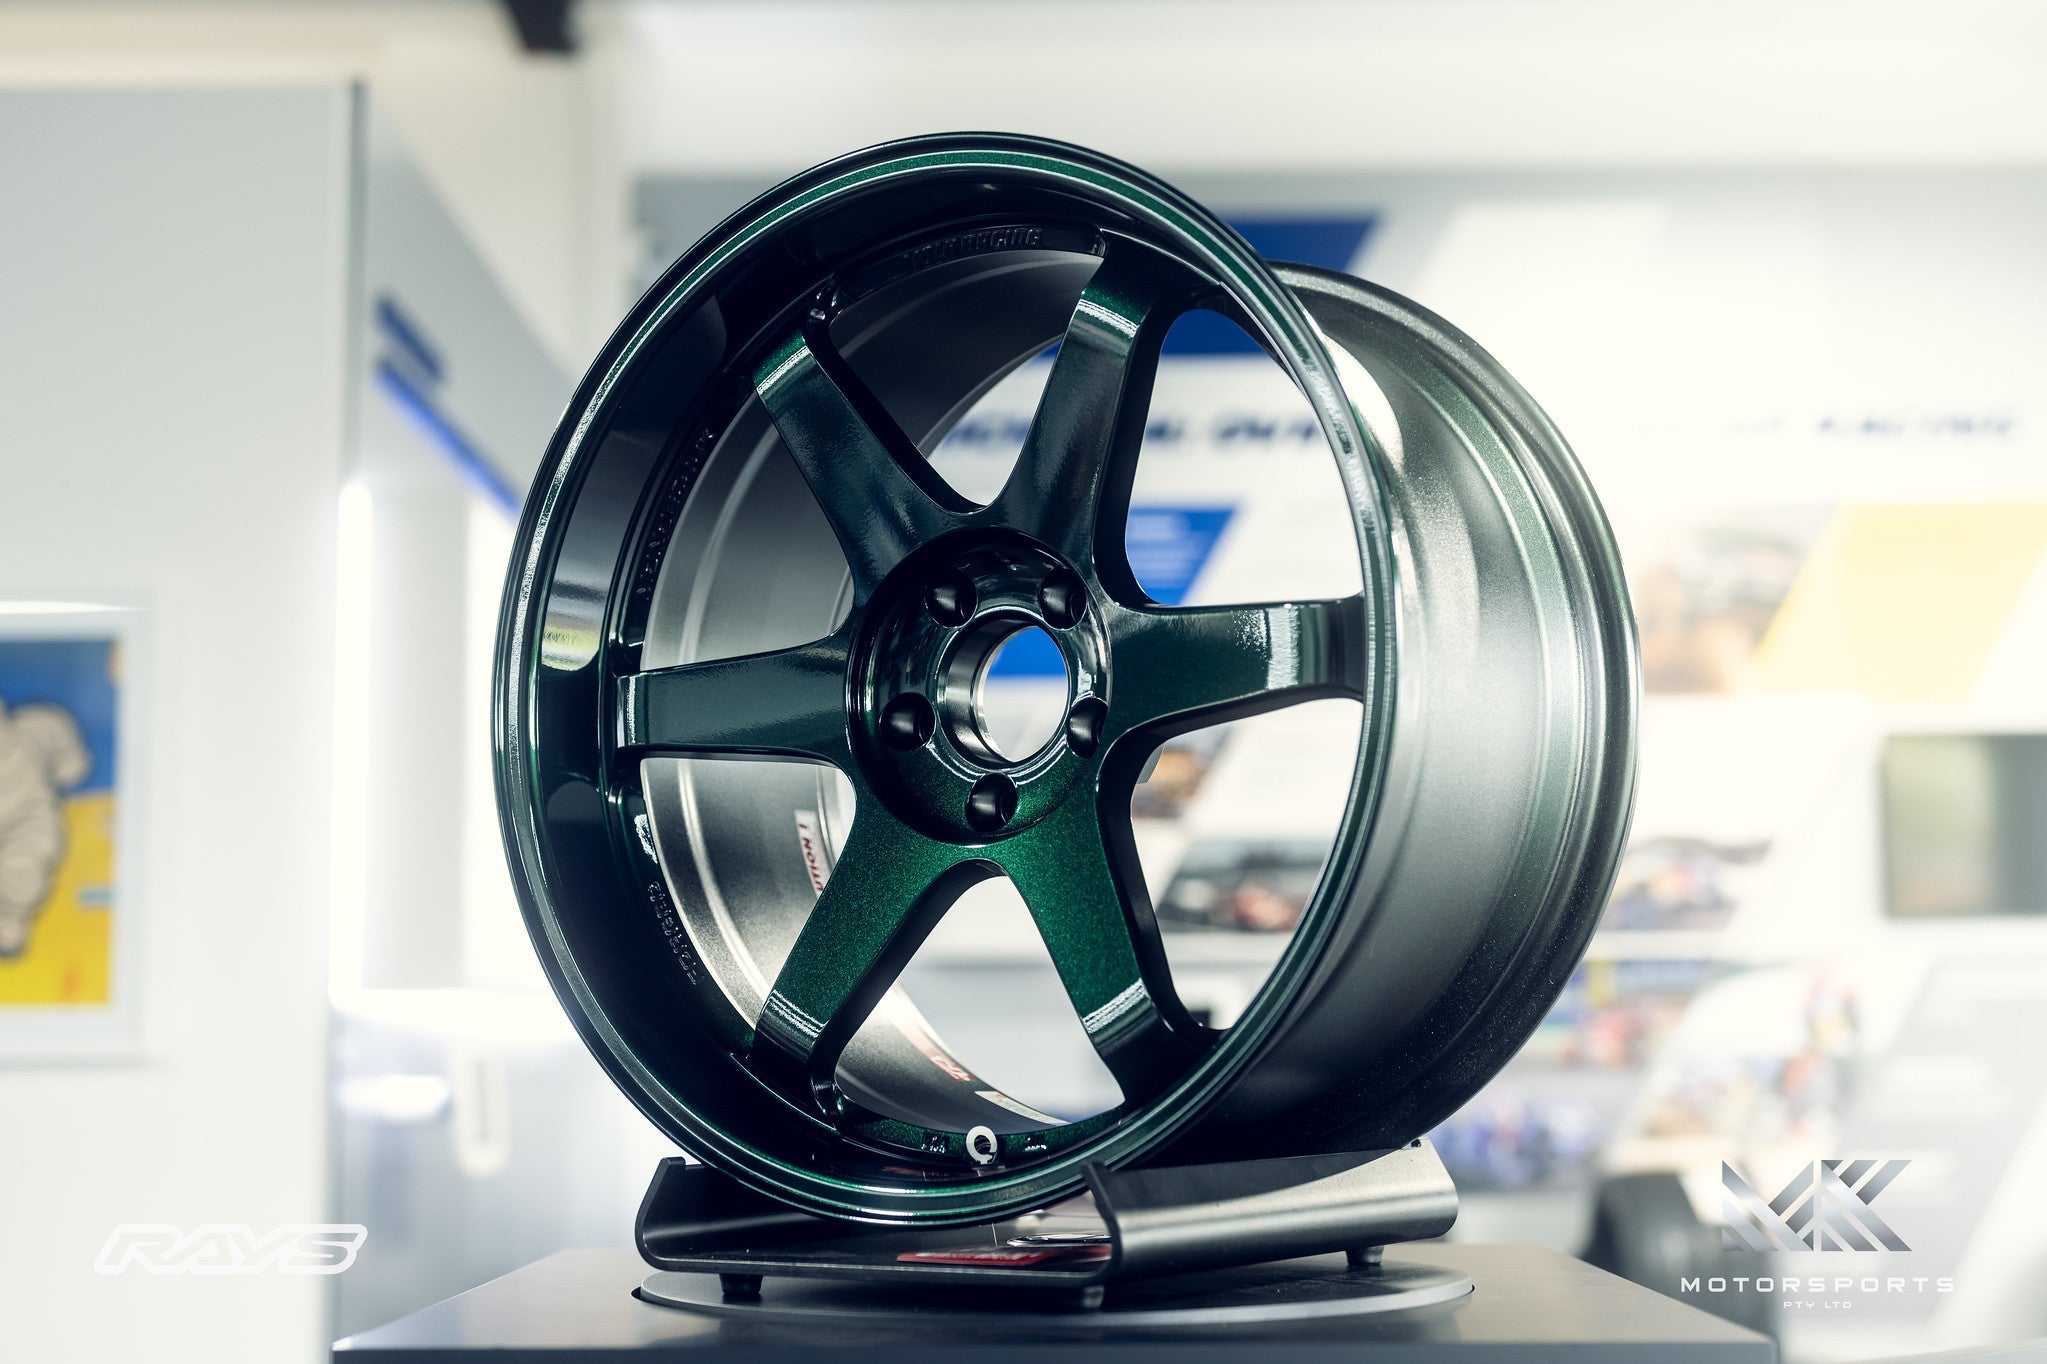 Volk Racing TE37SL 19" for R34 GT-R - Premium Wheels from Volk Racing - From just $4990.00! Shop now at MK MOTORSPORTS